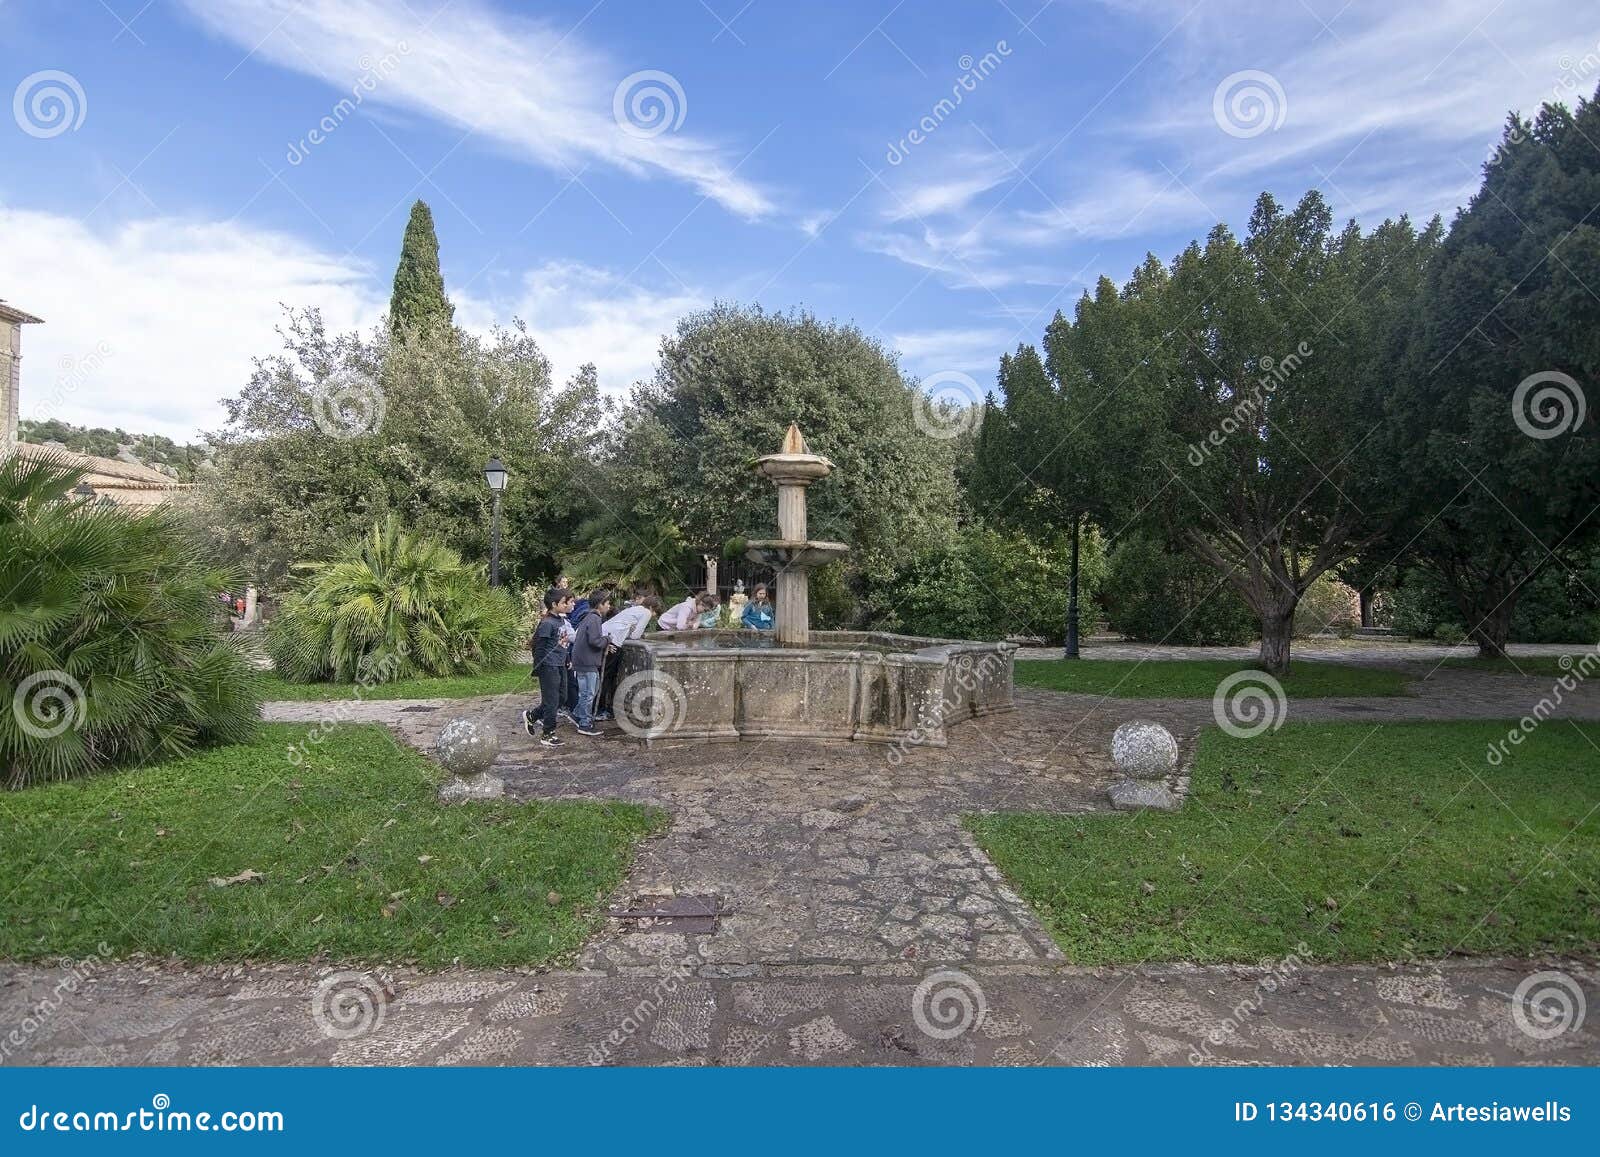 Fountain in Garden of Medieval Monastery Editorial Photo - Image of